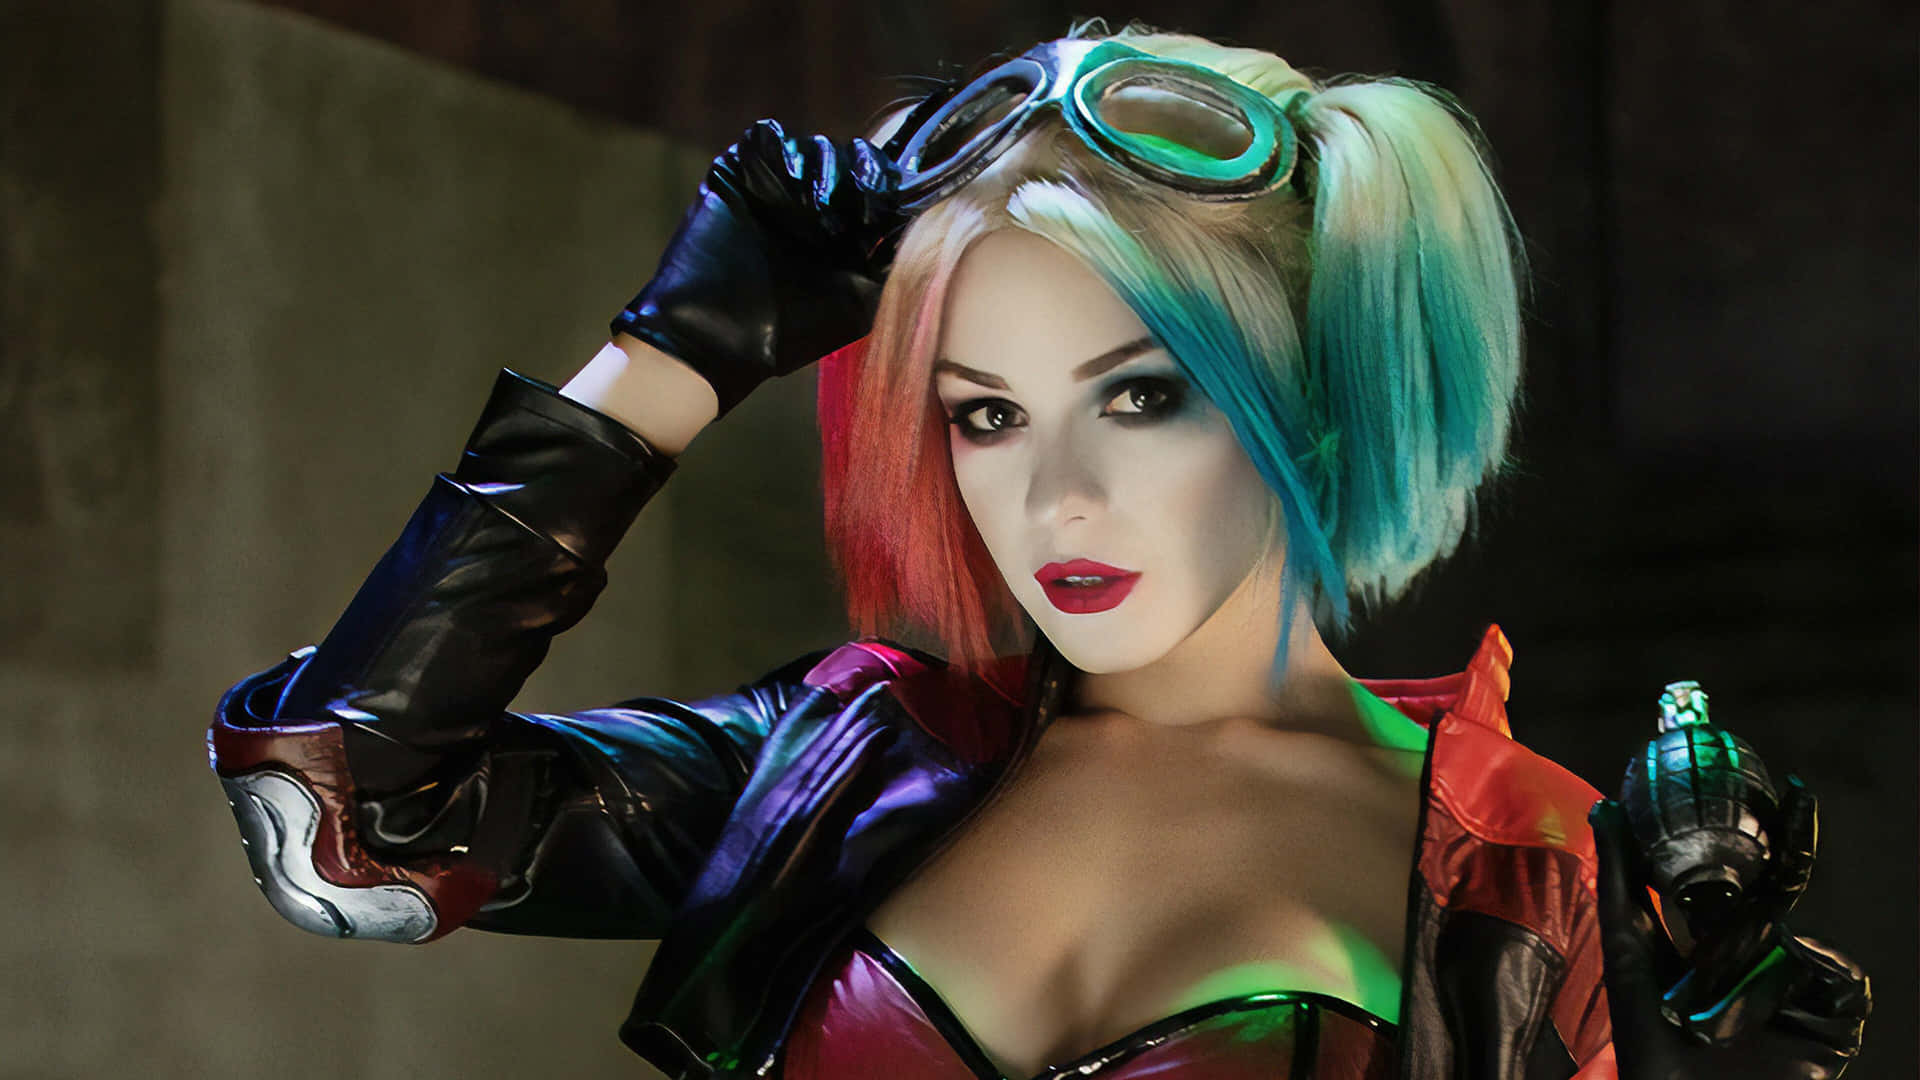 Captivating Harley Quinn Cosplay in Action Wallpaper